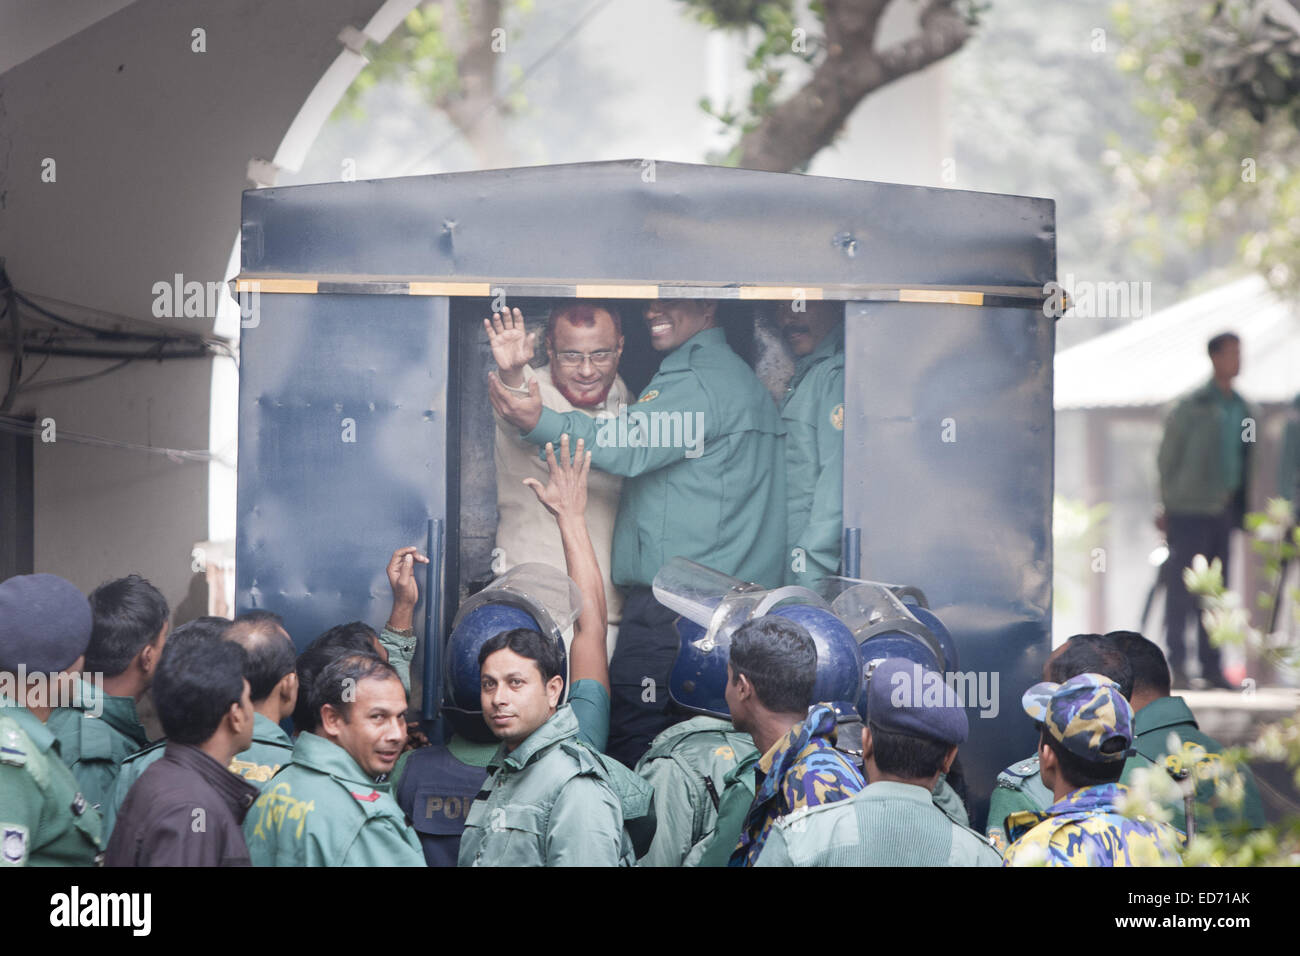 Dec. 30, 2014 - Dhaka, Bangladesh - Al-Badr commander ATM Azharul Islam, a senior leader of the Bangladesh's largest Islamist party Jamaat-e-Islami waves his hand as he enters a police van after a special tribunal sentenced him to death for mass murder during the nation's 1971 independence war against Pakistan. (Credit Image: © Suvra Kanti Das/ZUMA Wire/ZUMAPRESS.com) Stock Photo